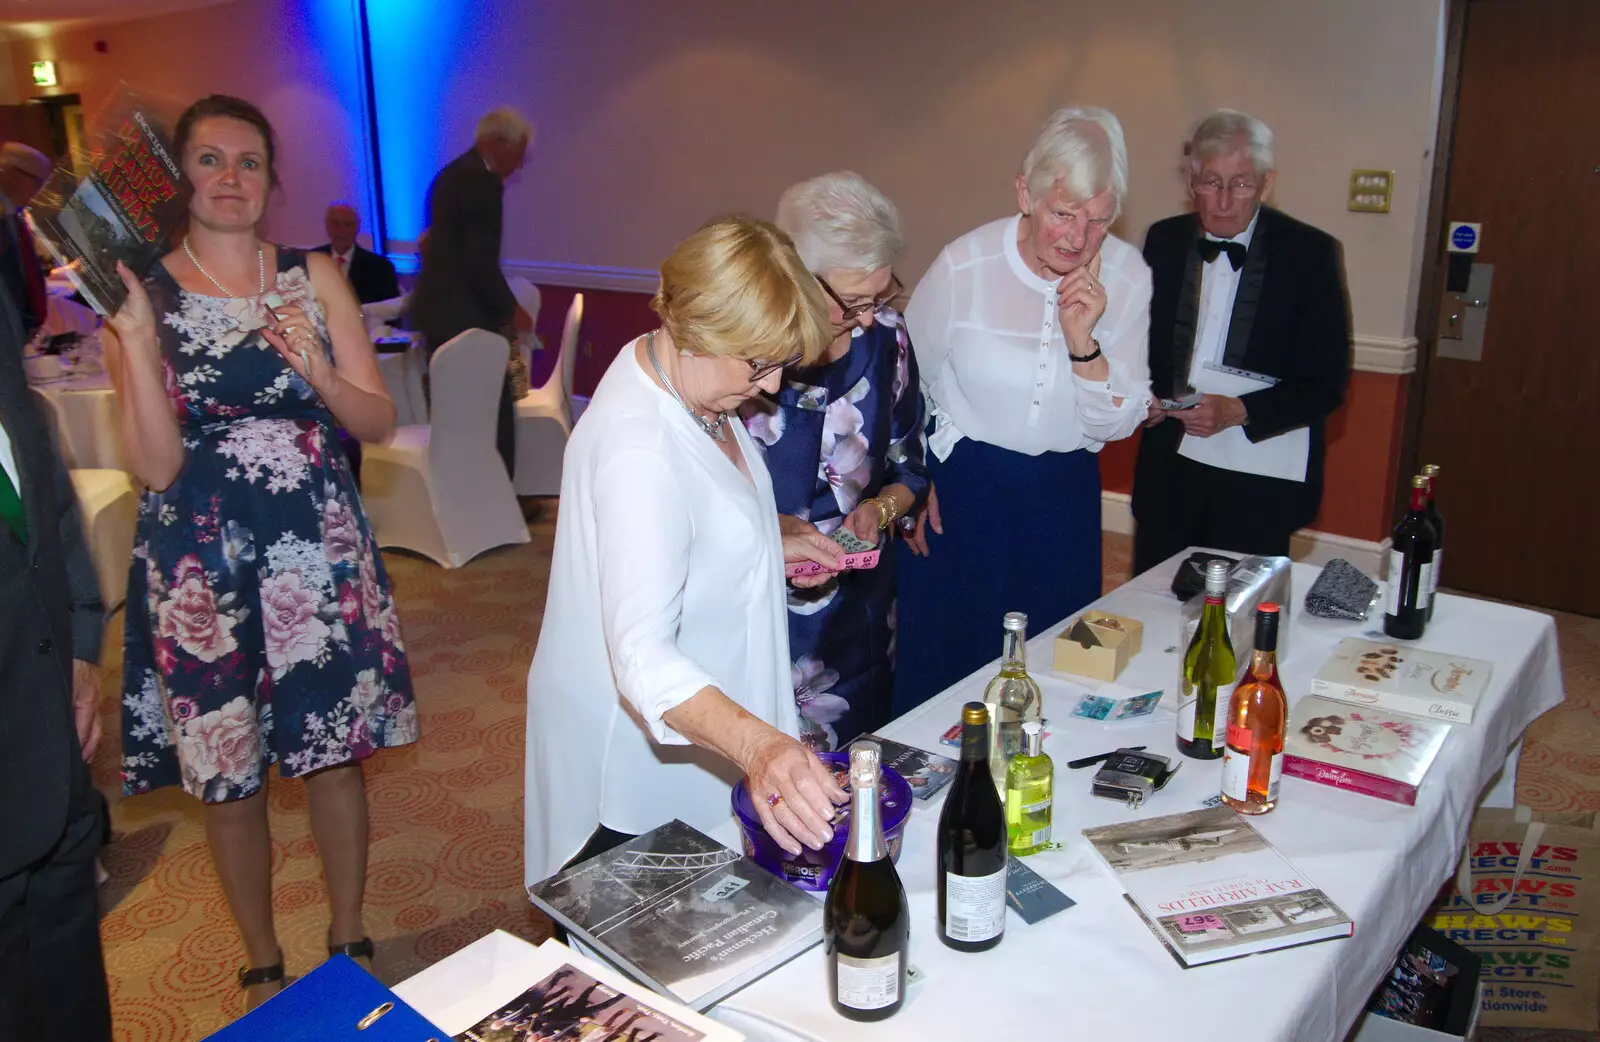 Isobel wins a book about narrow-guage railways, from Kenilworth Castle and the 69th Entry Reunion Dinner, Stratford, Warwickshire - 14th September 2019